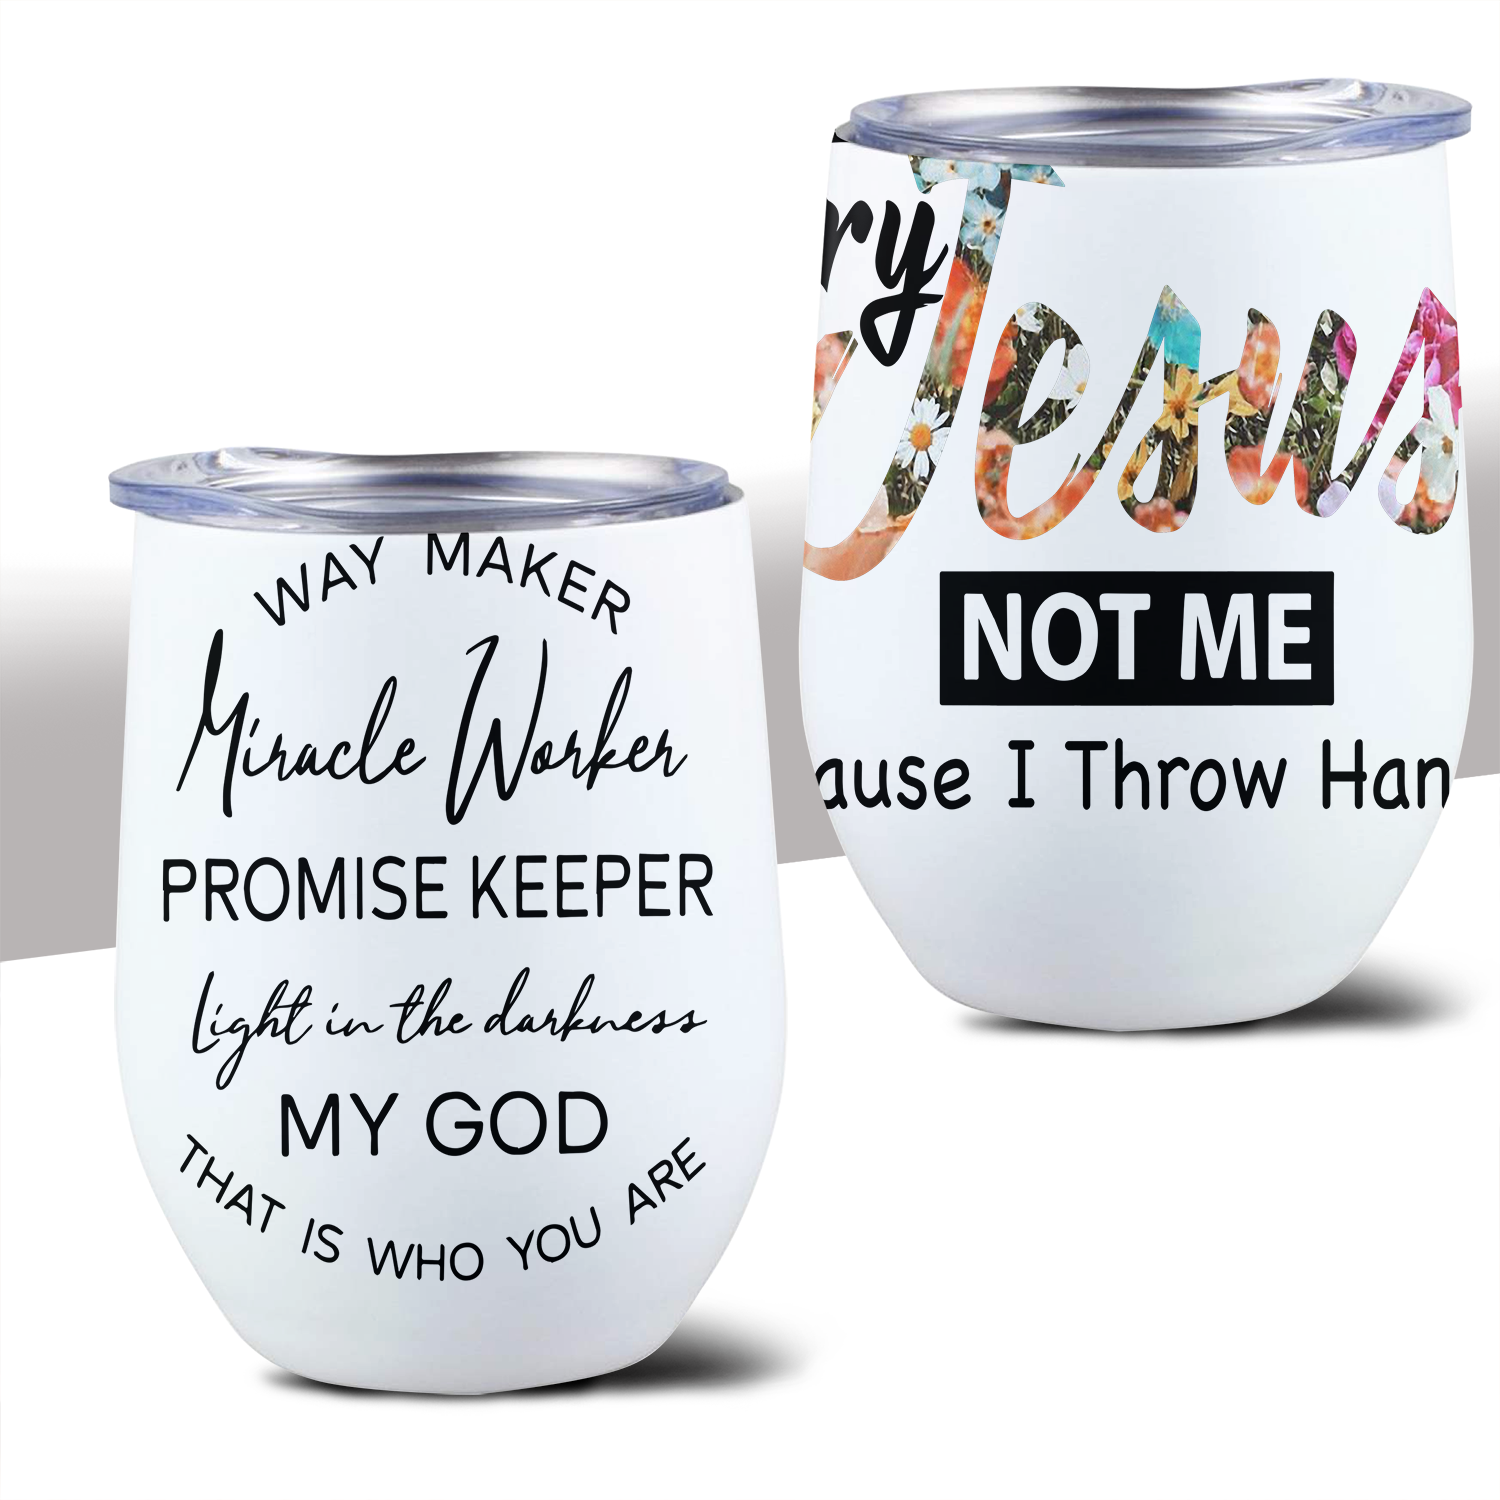 Way Maker Miracle Worker Promise Keeper My God Wine Tumbler, Try Jesus Not Me Wine Tumbler, Gift for Friend, Way Maker Wine Tumbler